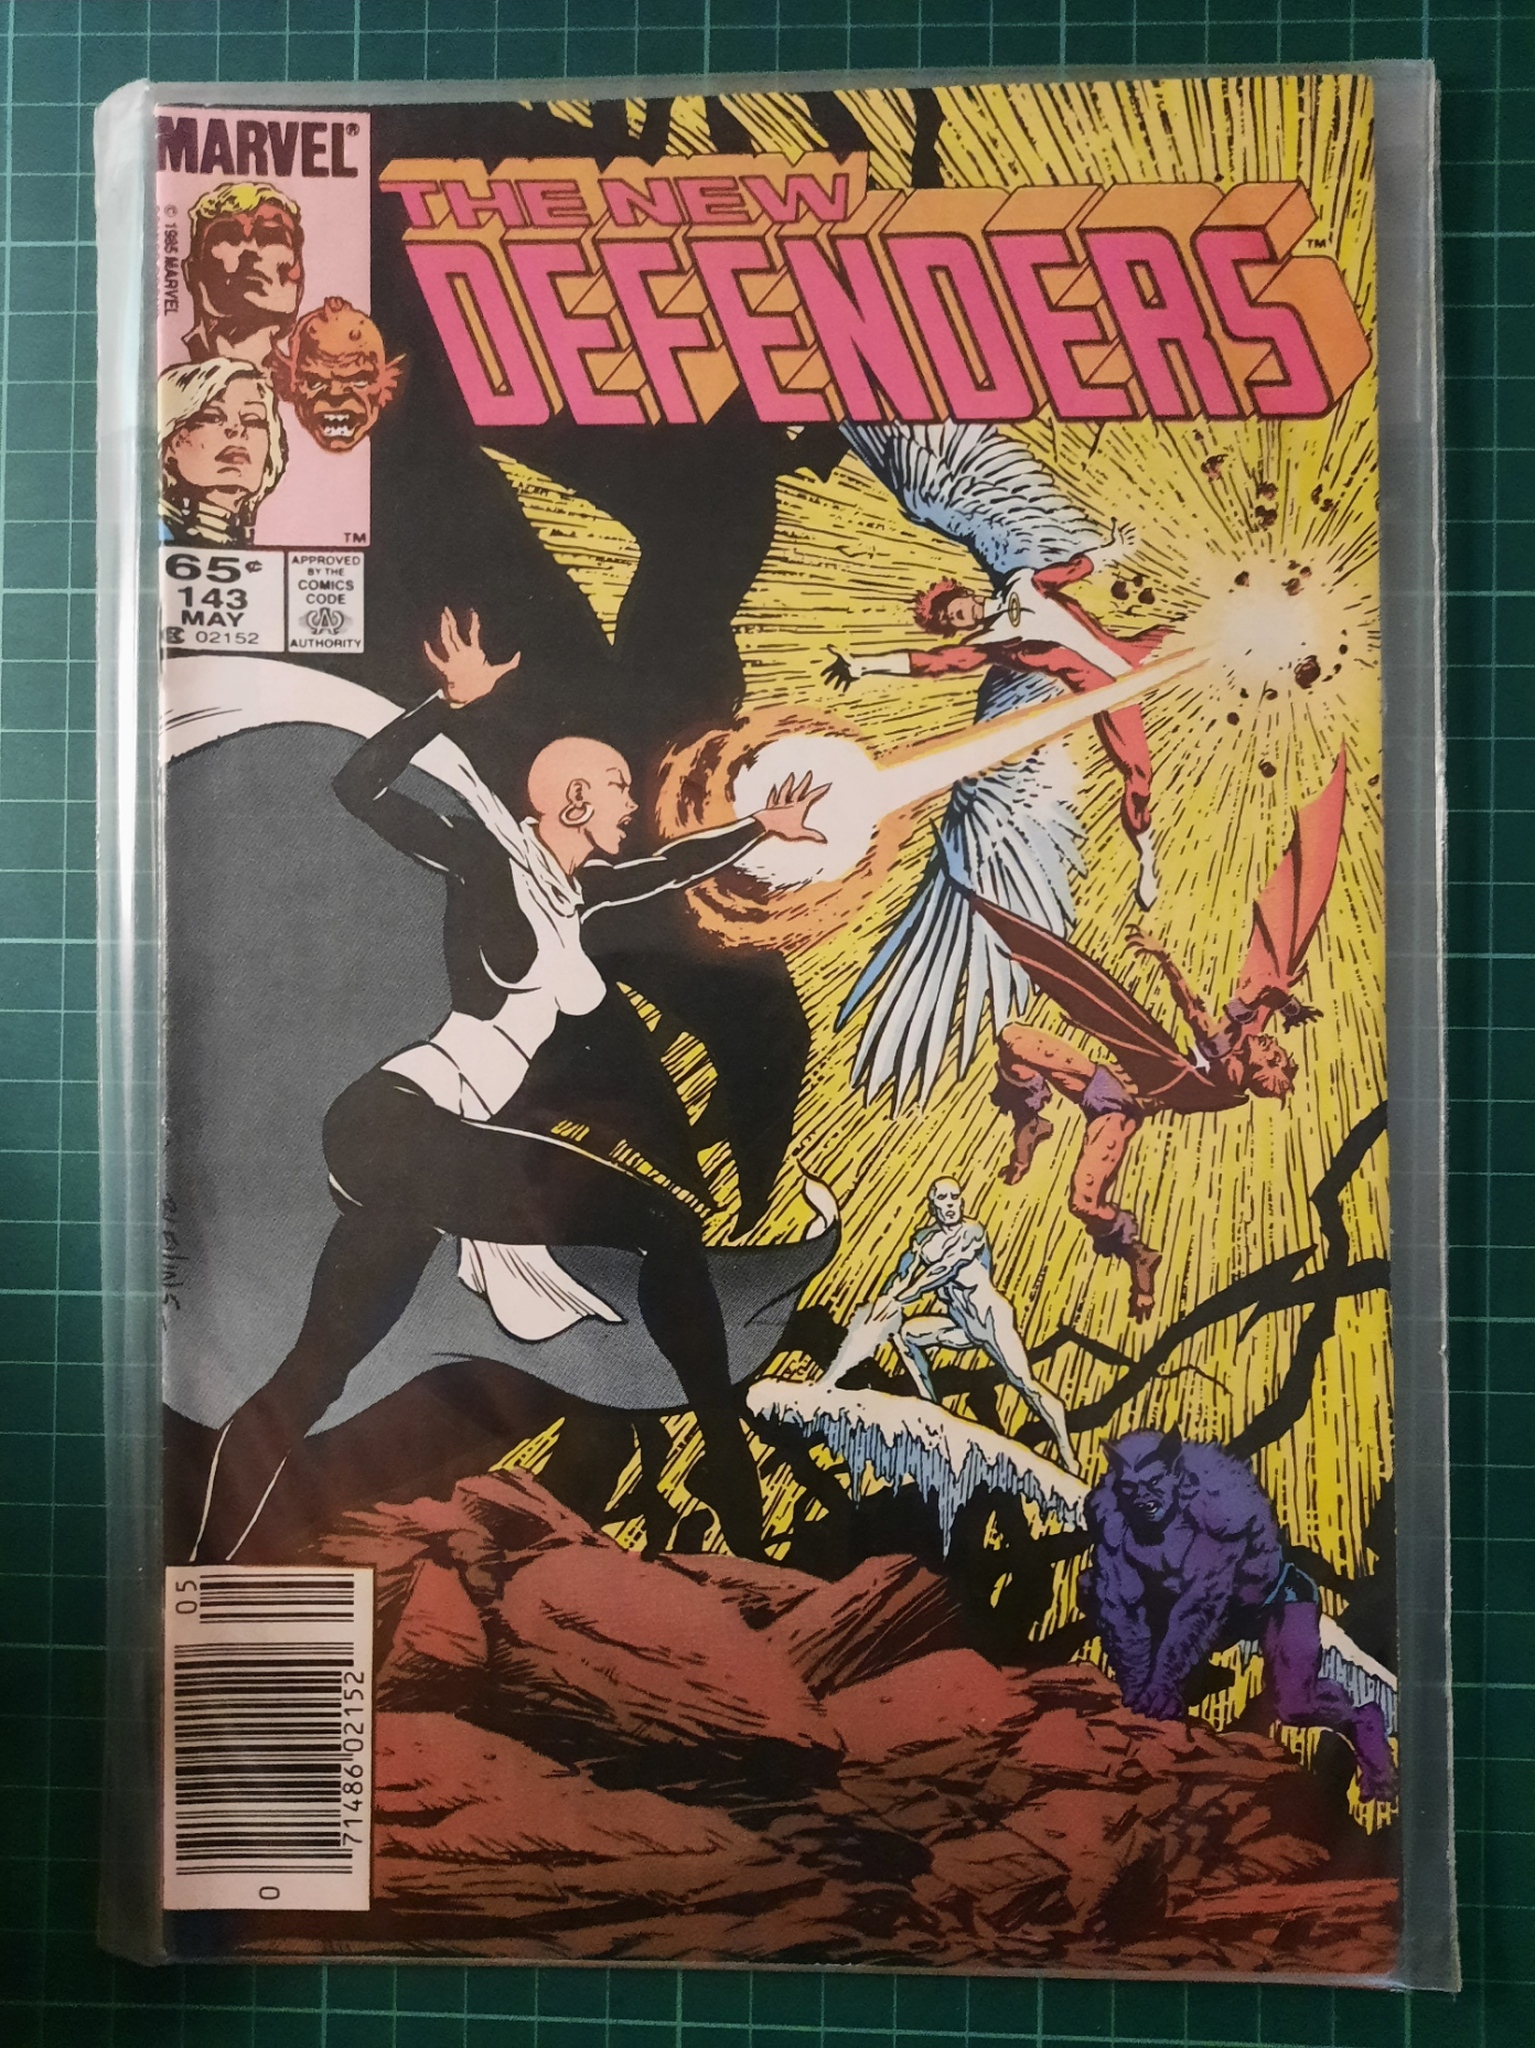 The new Defenders #143